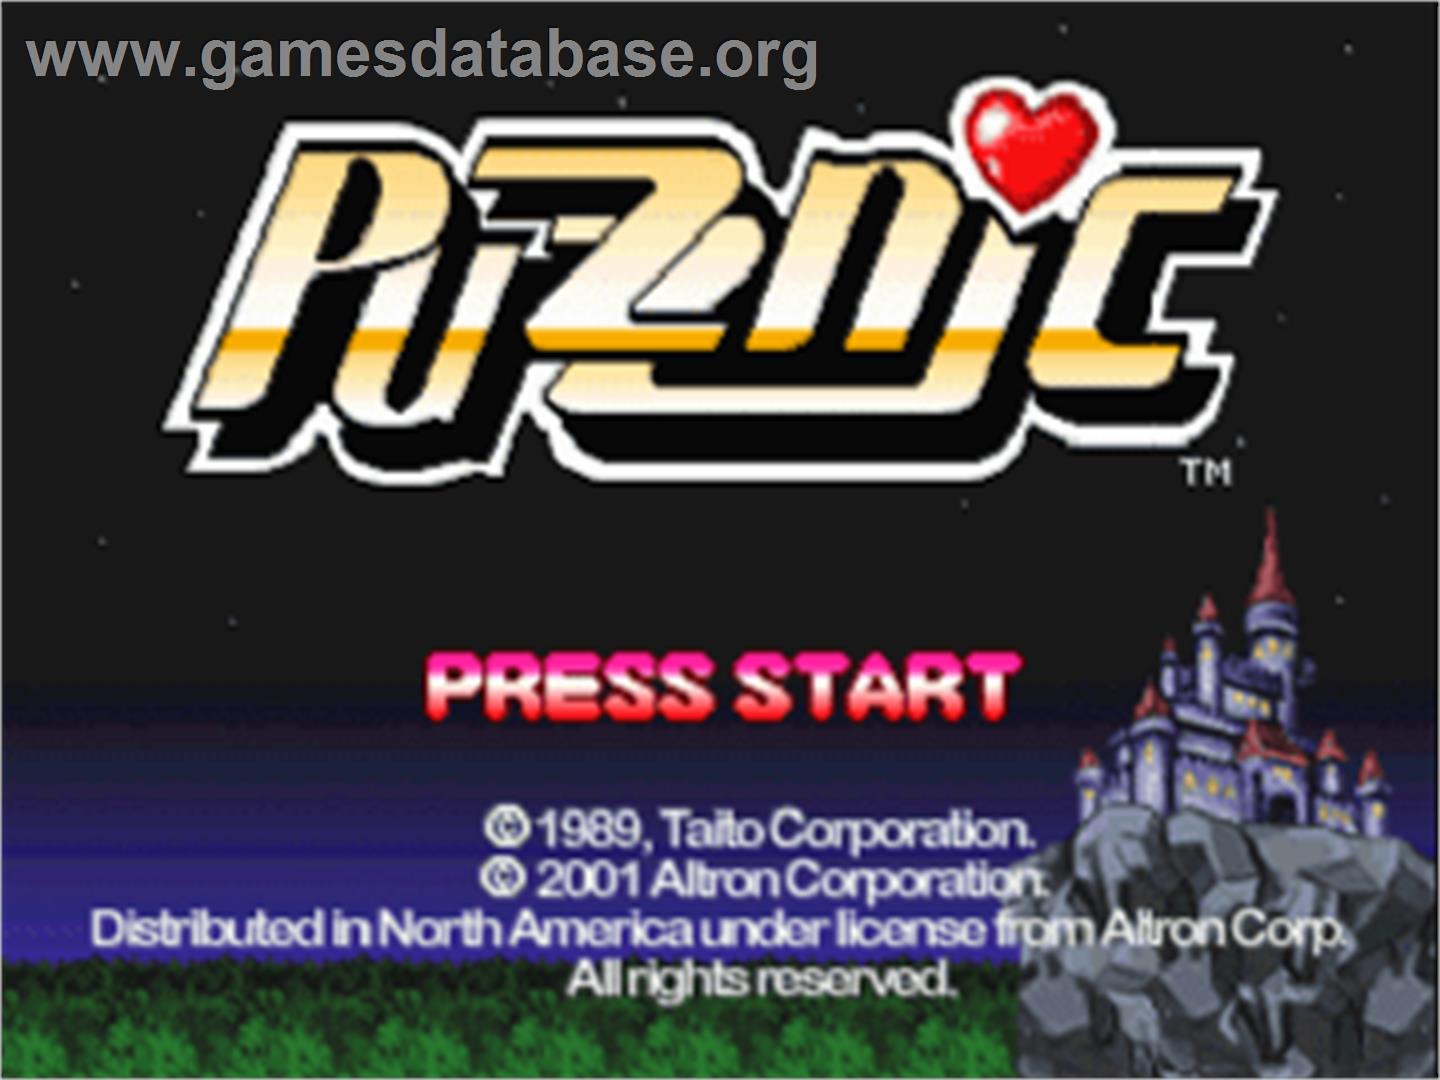 Puzznic - Sony Playstation - Artwork - Title Screen